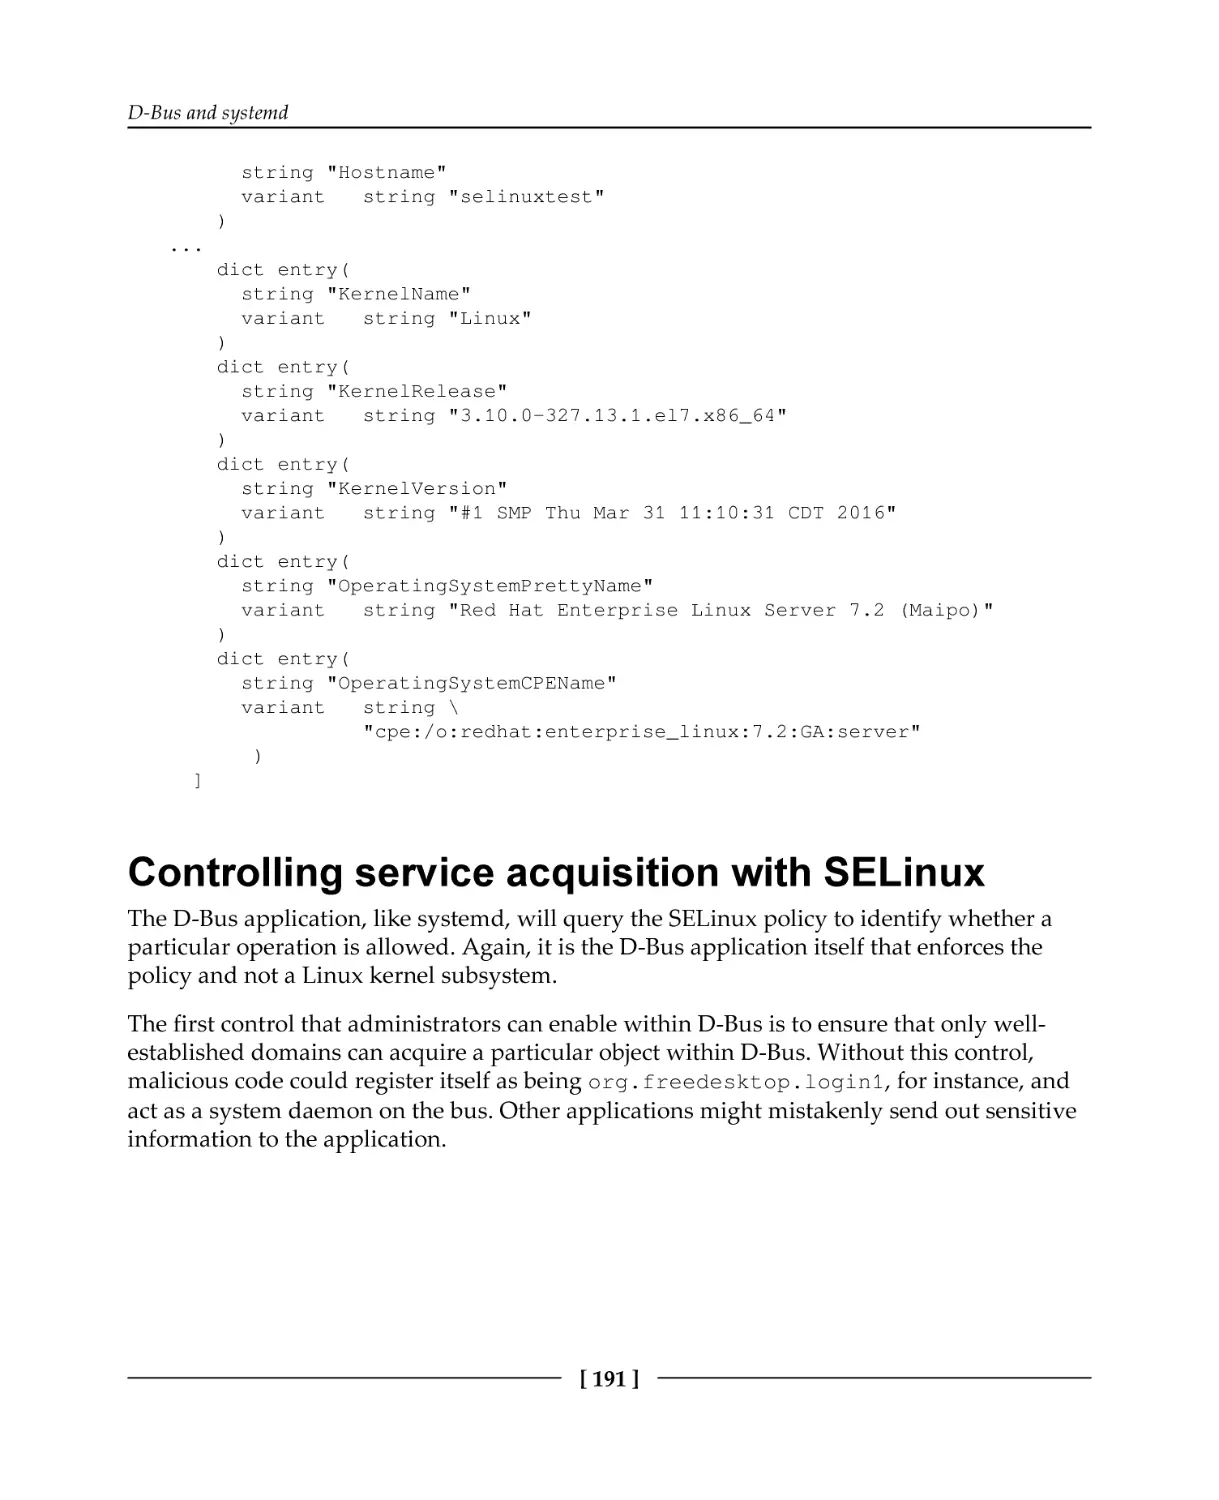 Controlling service acquisition with SELinux